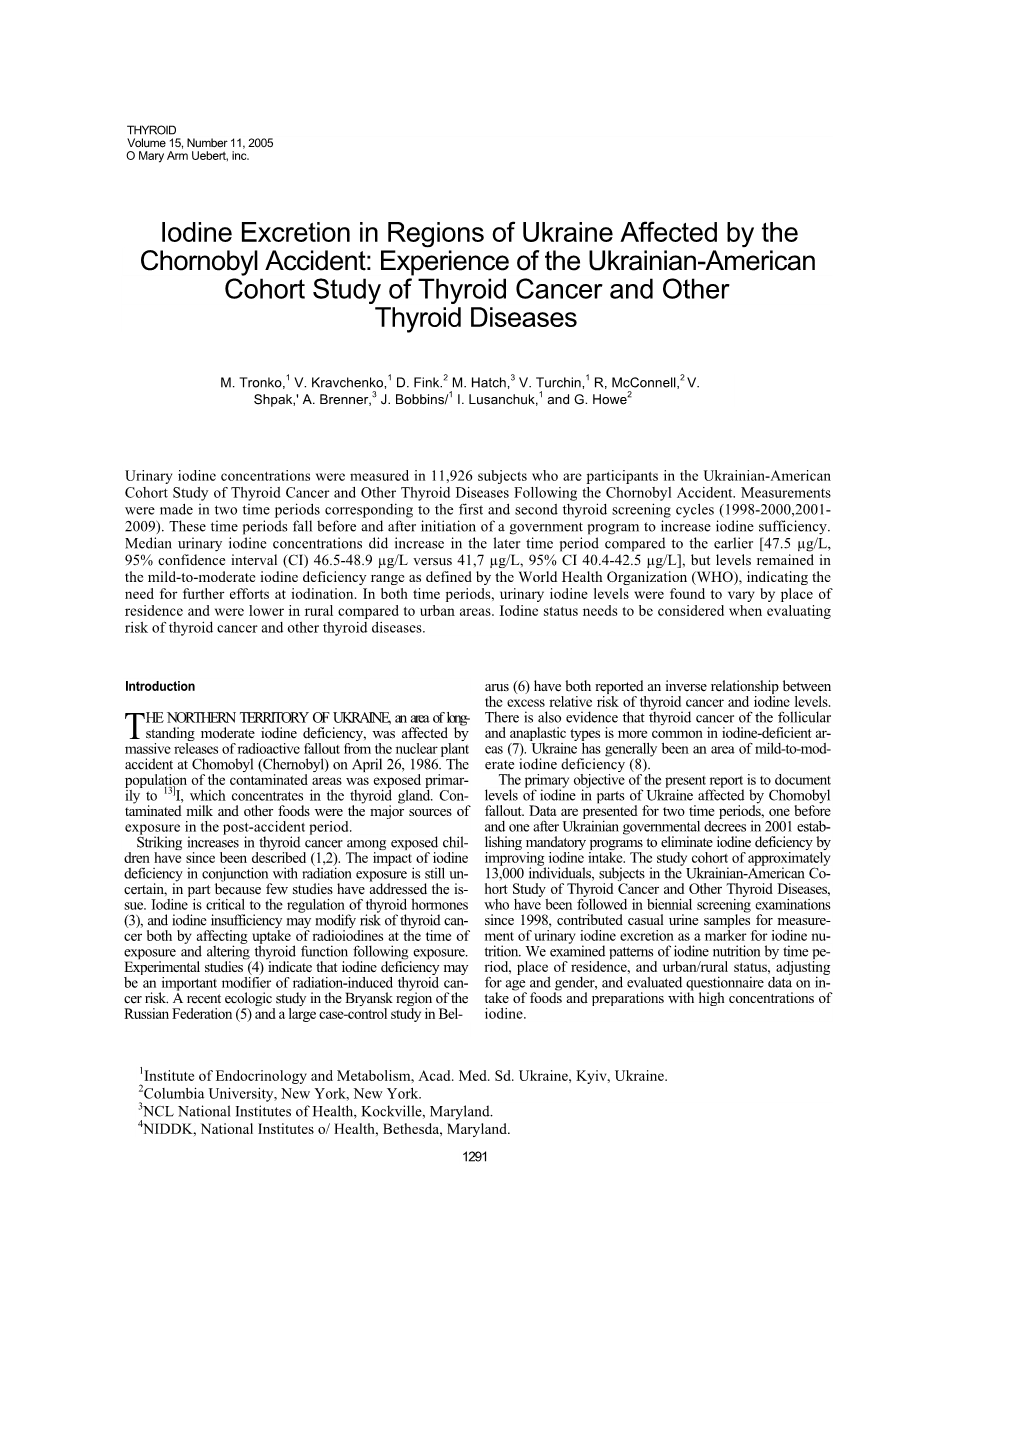 Iodine Excretion in Regions of Ukraine Affected by the Chornobyl Accident